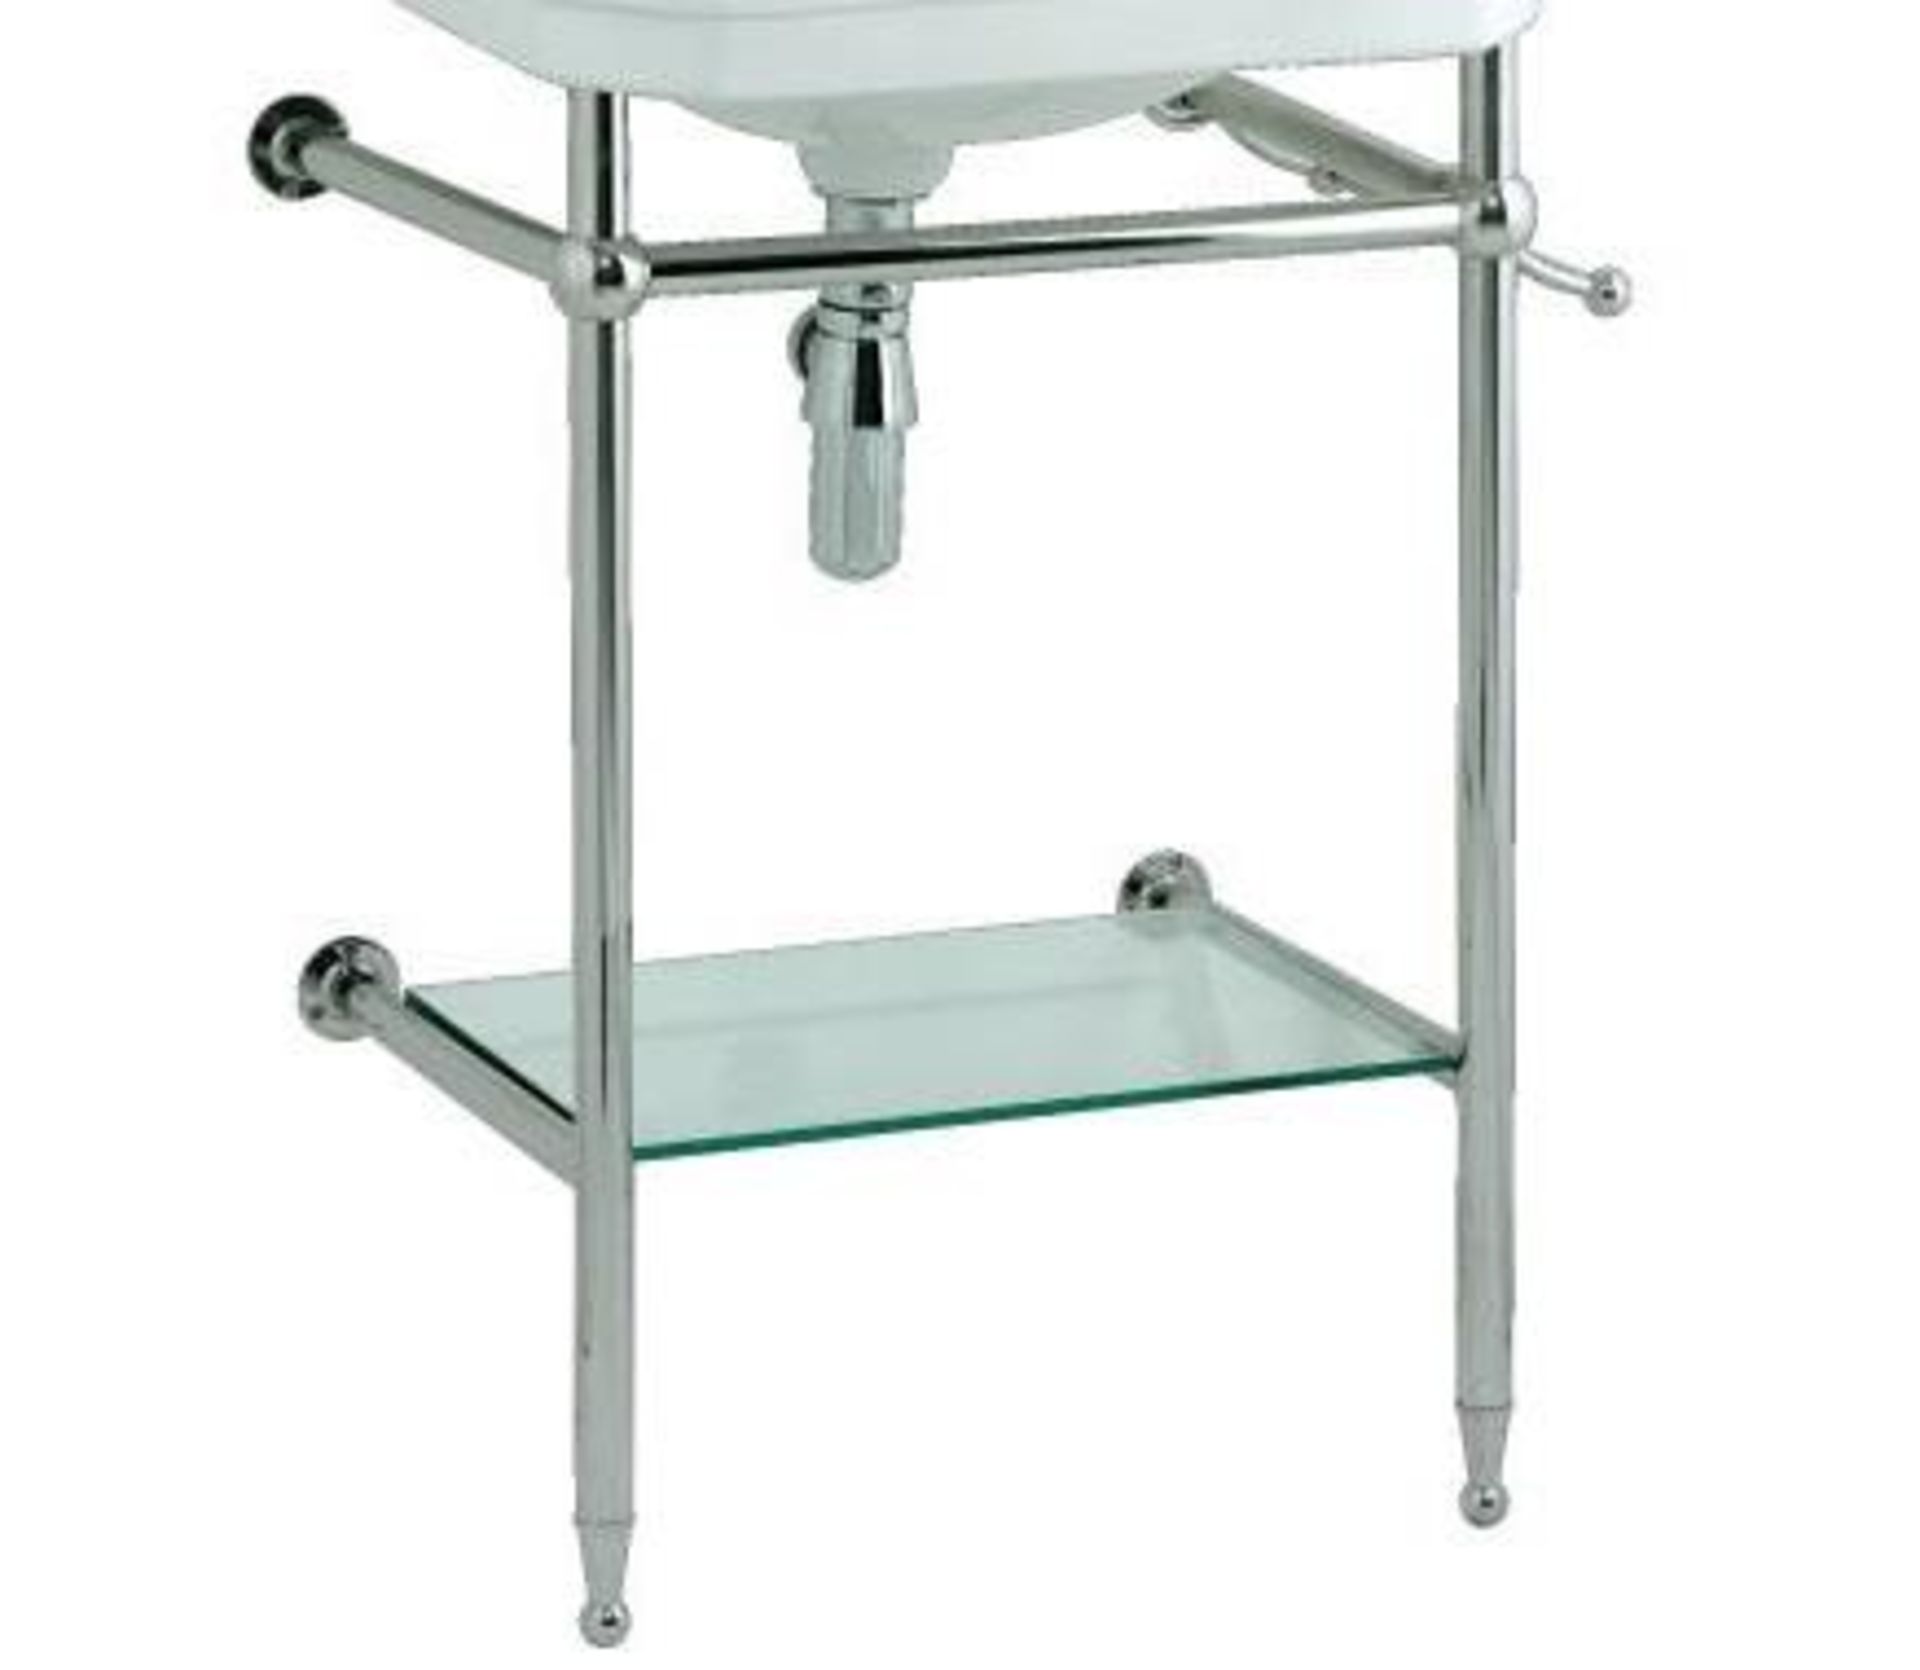 560/575 traditional basin stand with glass shelf – chrome - Image 2 of 2